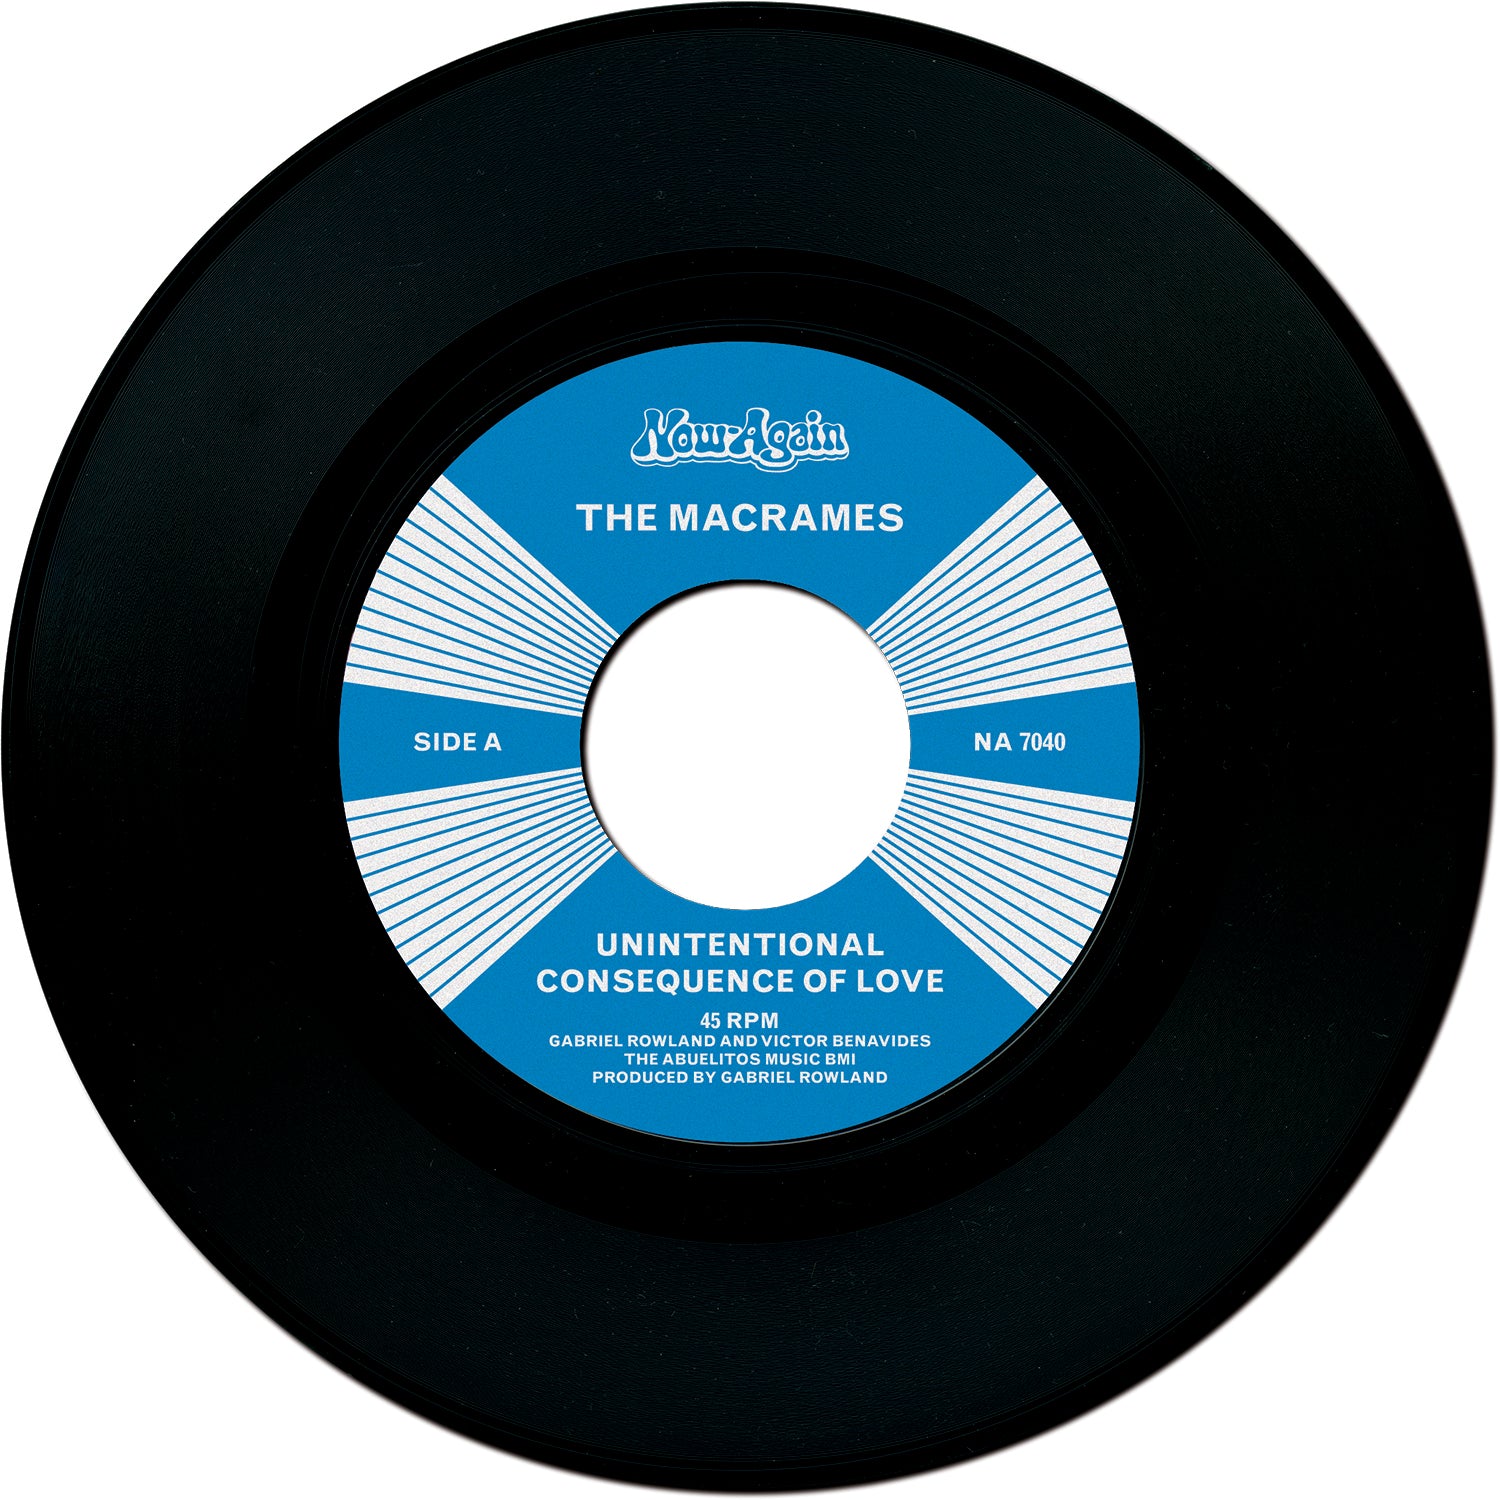 The Macrames - Unintentional Consequence of Love